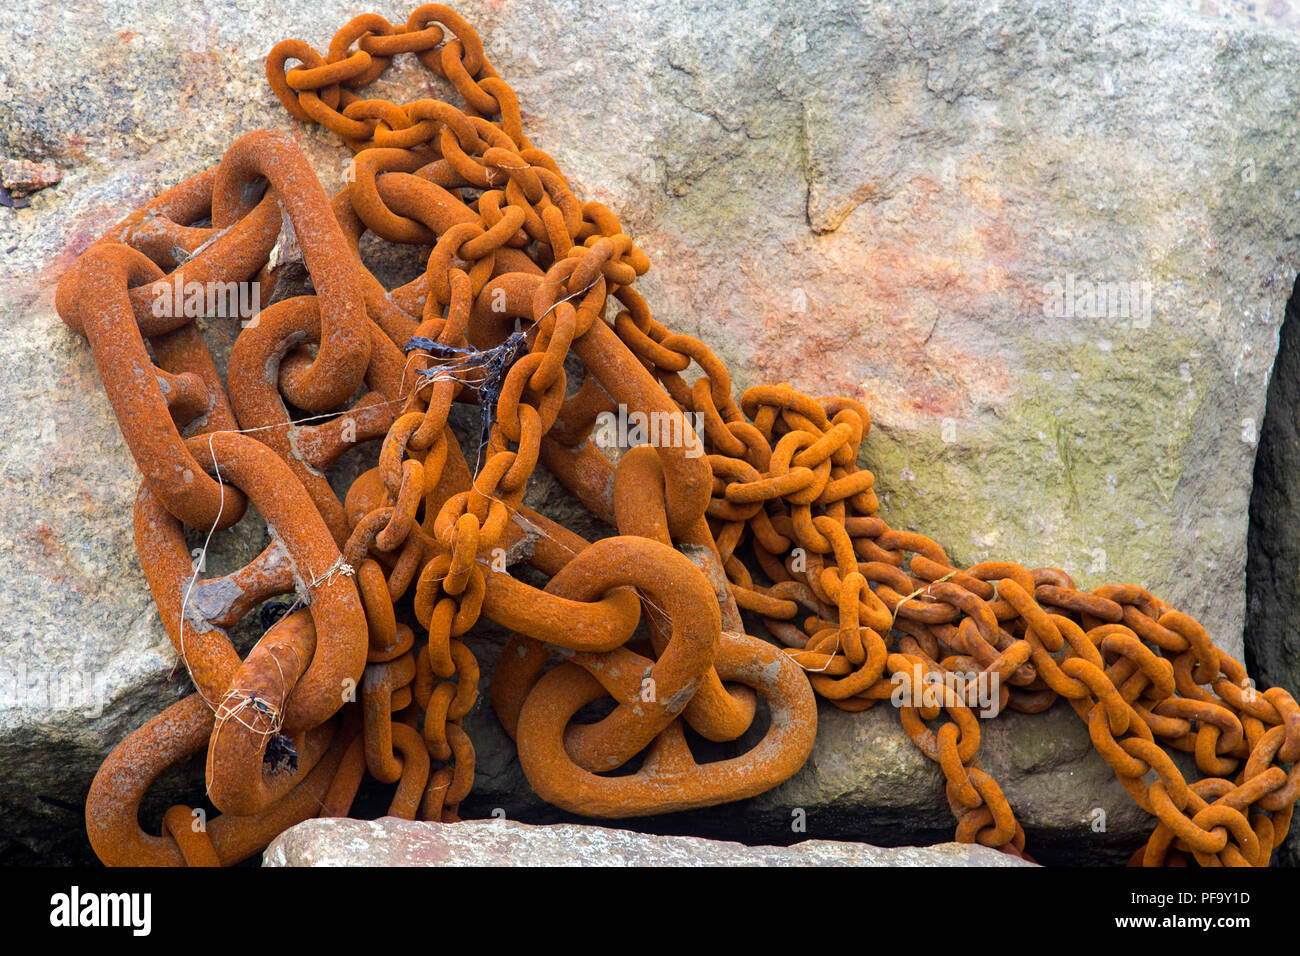 Rusty iron chains in a heap on rocks shot from above Stock Photo